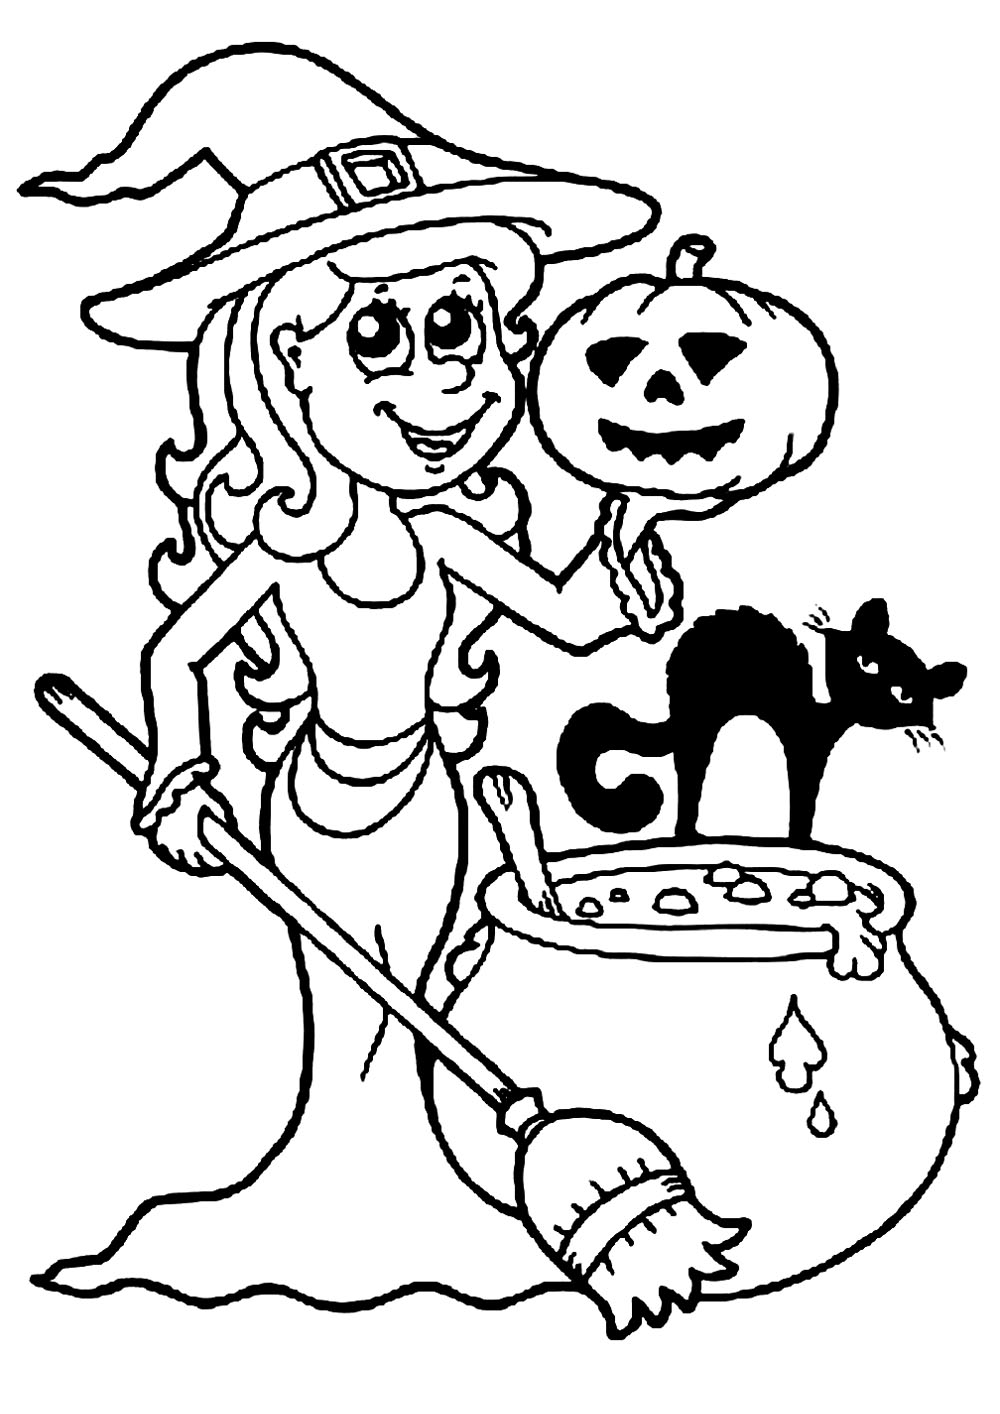 halloween-happy-kids-coloring-page-for-kids-printable-free-halloween